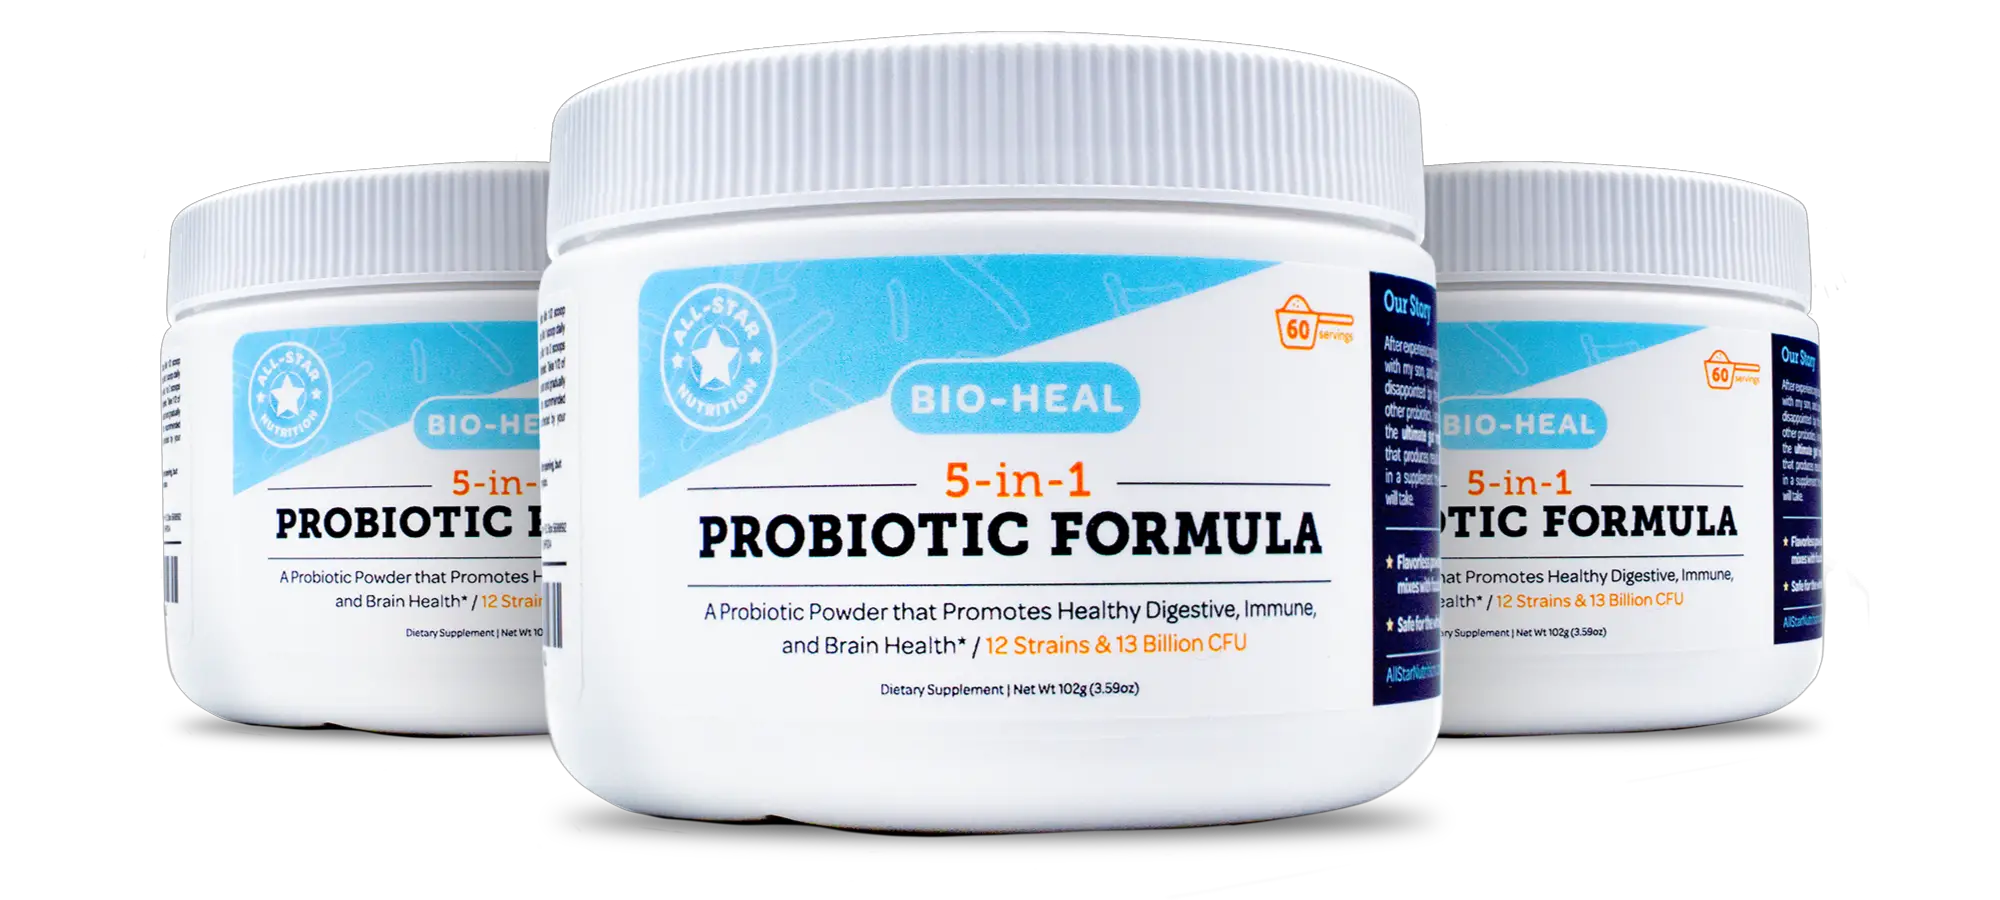 Save 20% on a Probiotic Supplement